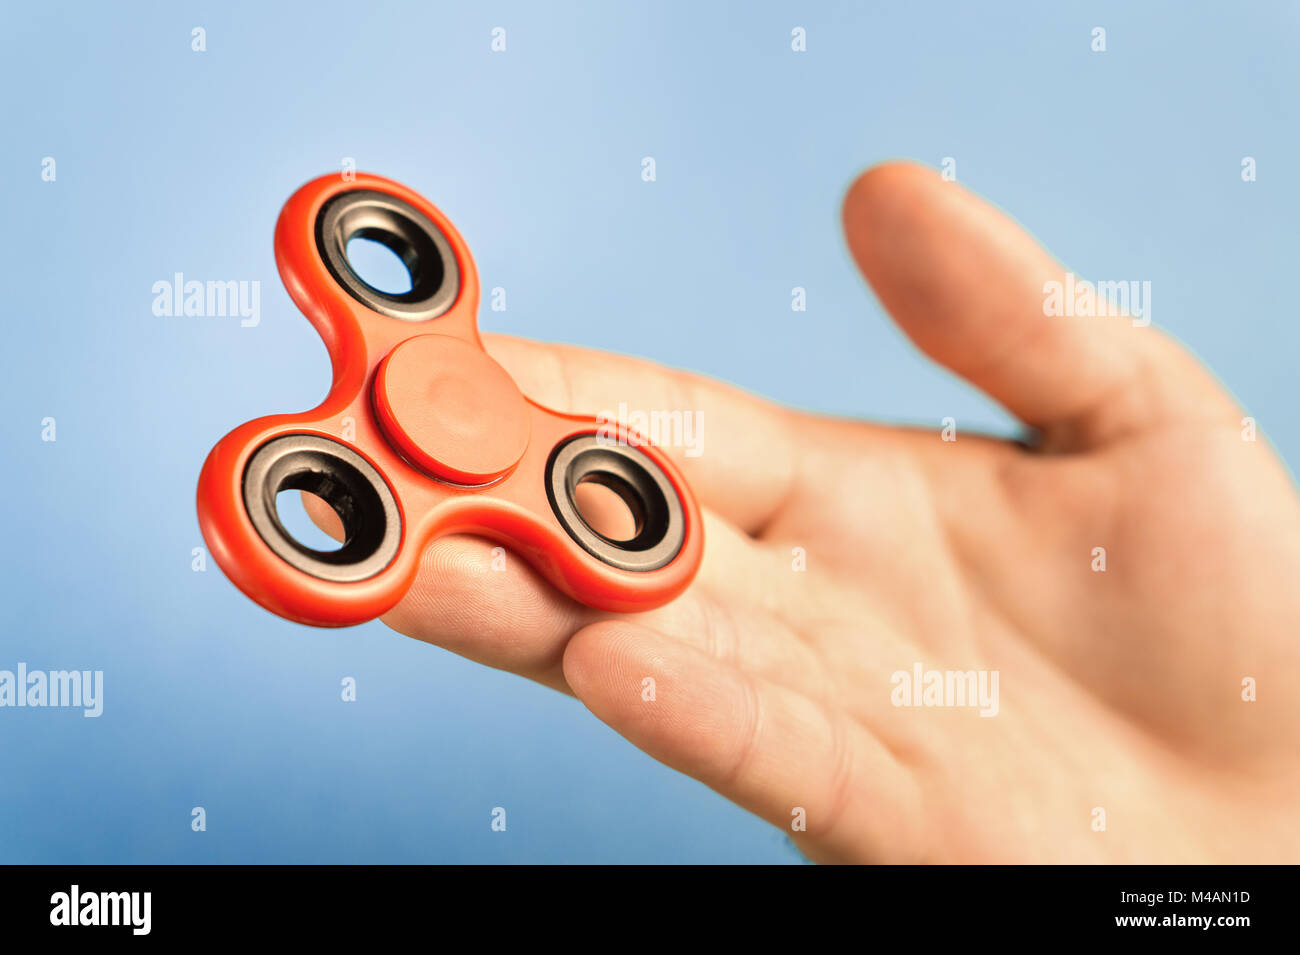 Fidget spinner on hand with blue background. Stock Photo